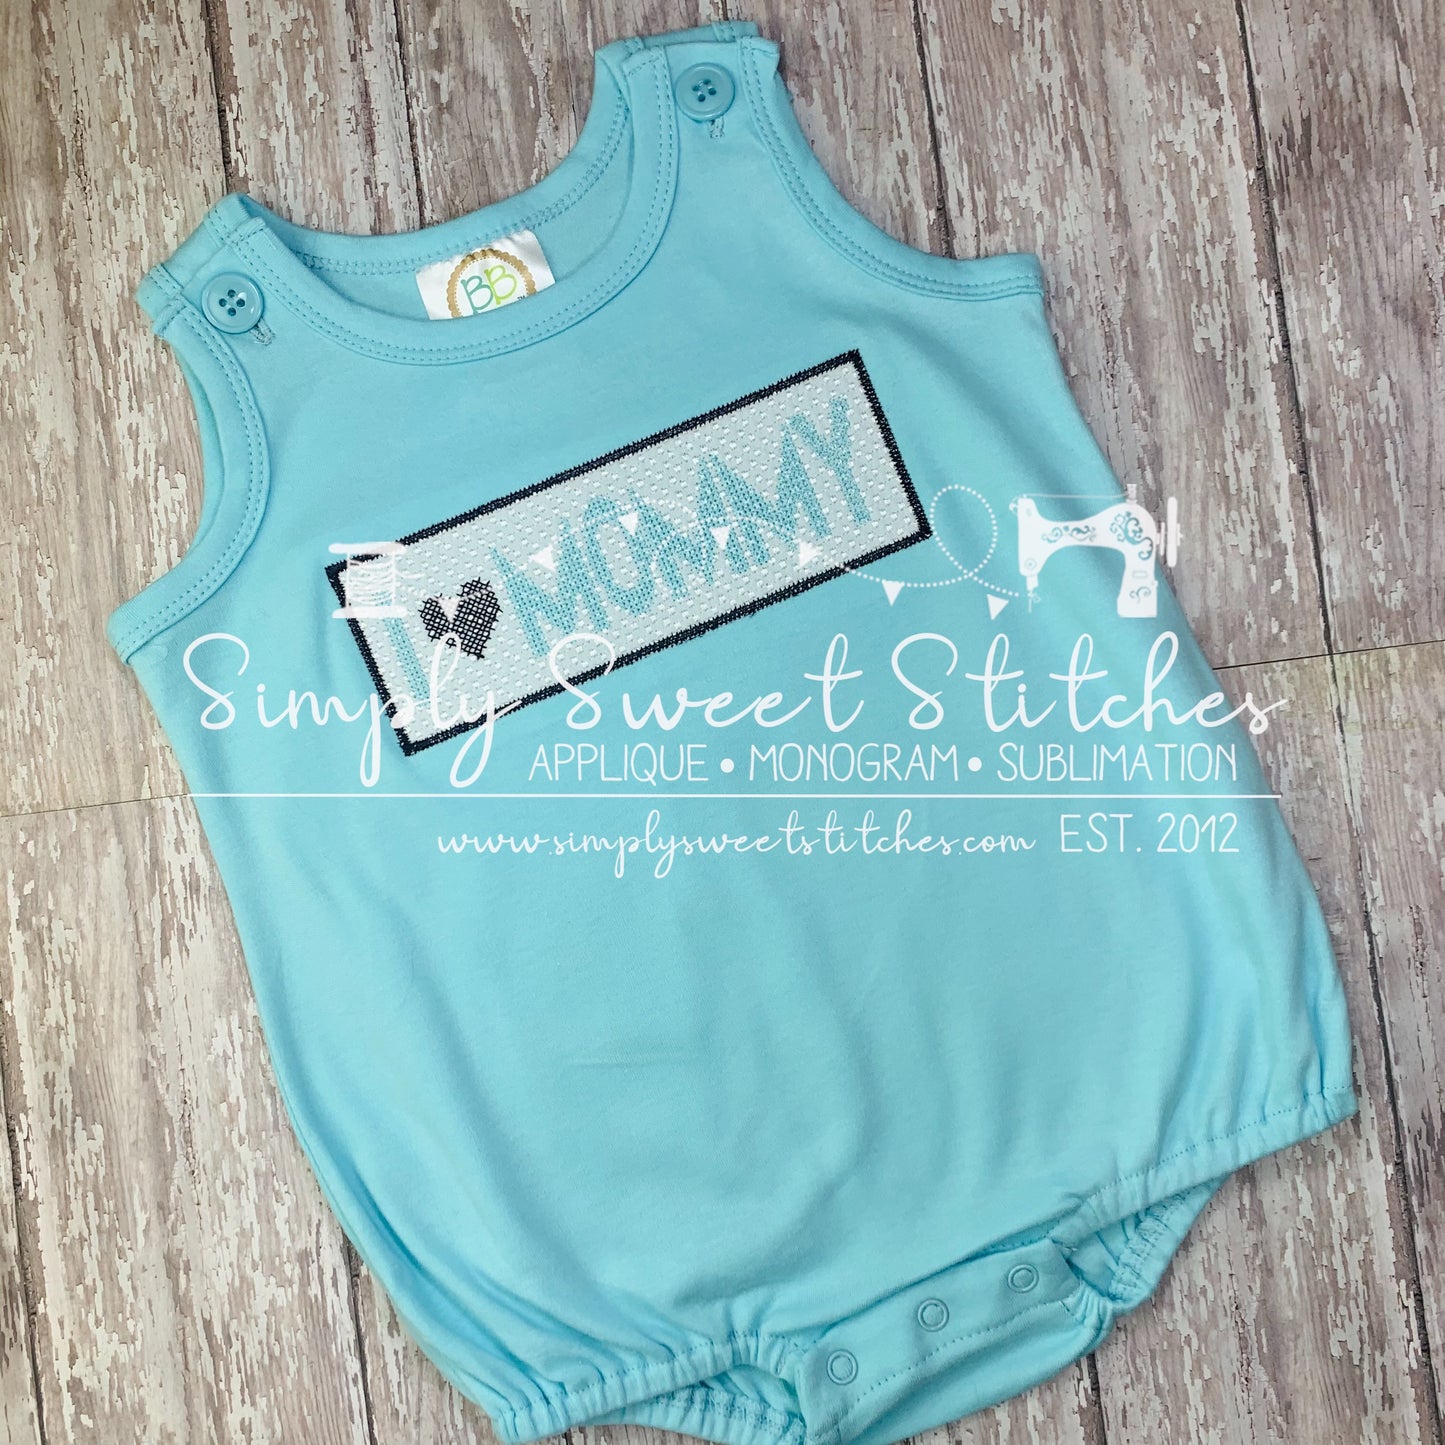 2586 - I LOVE MOMMY FAUX SMOCK APPLIQUE - CHILD SHIRT